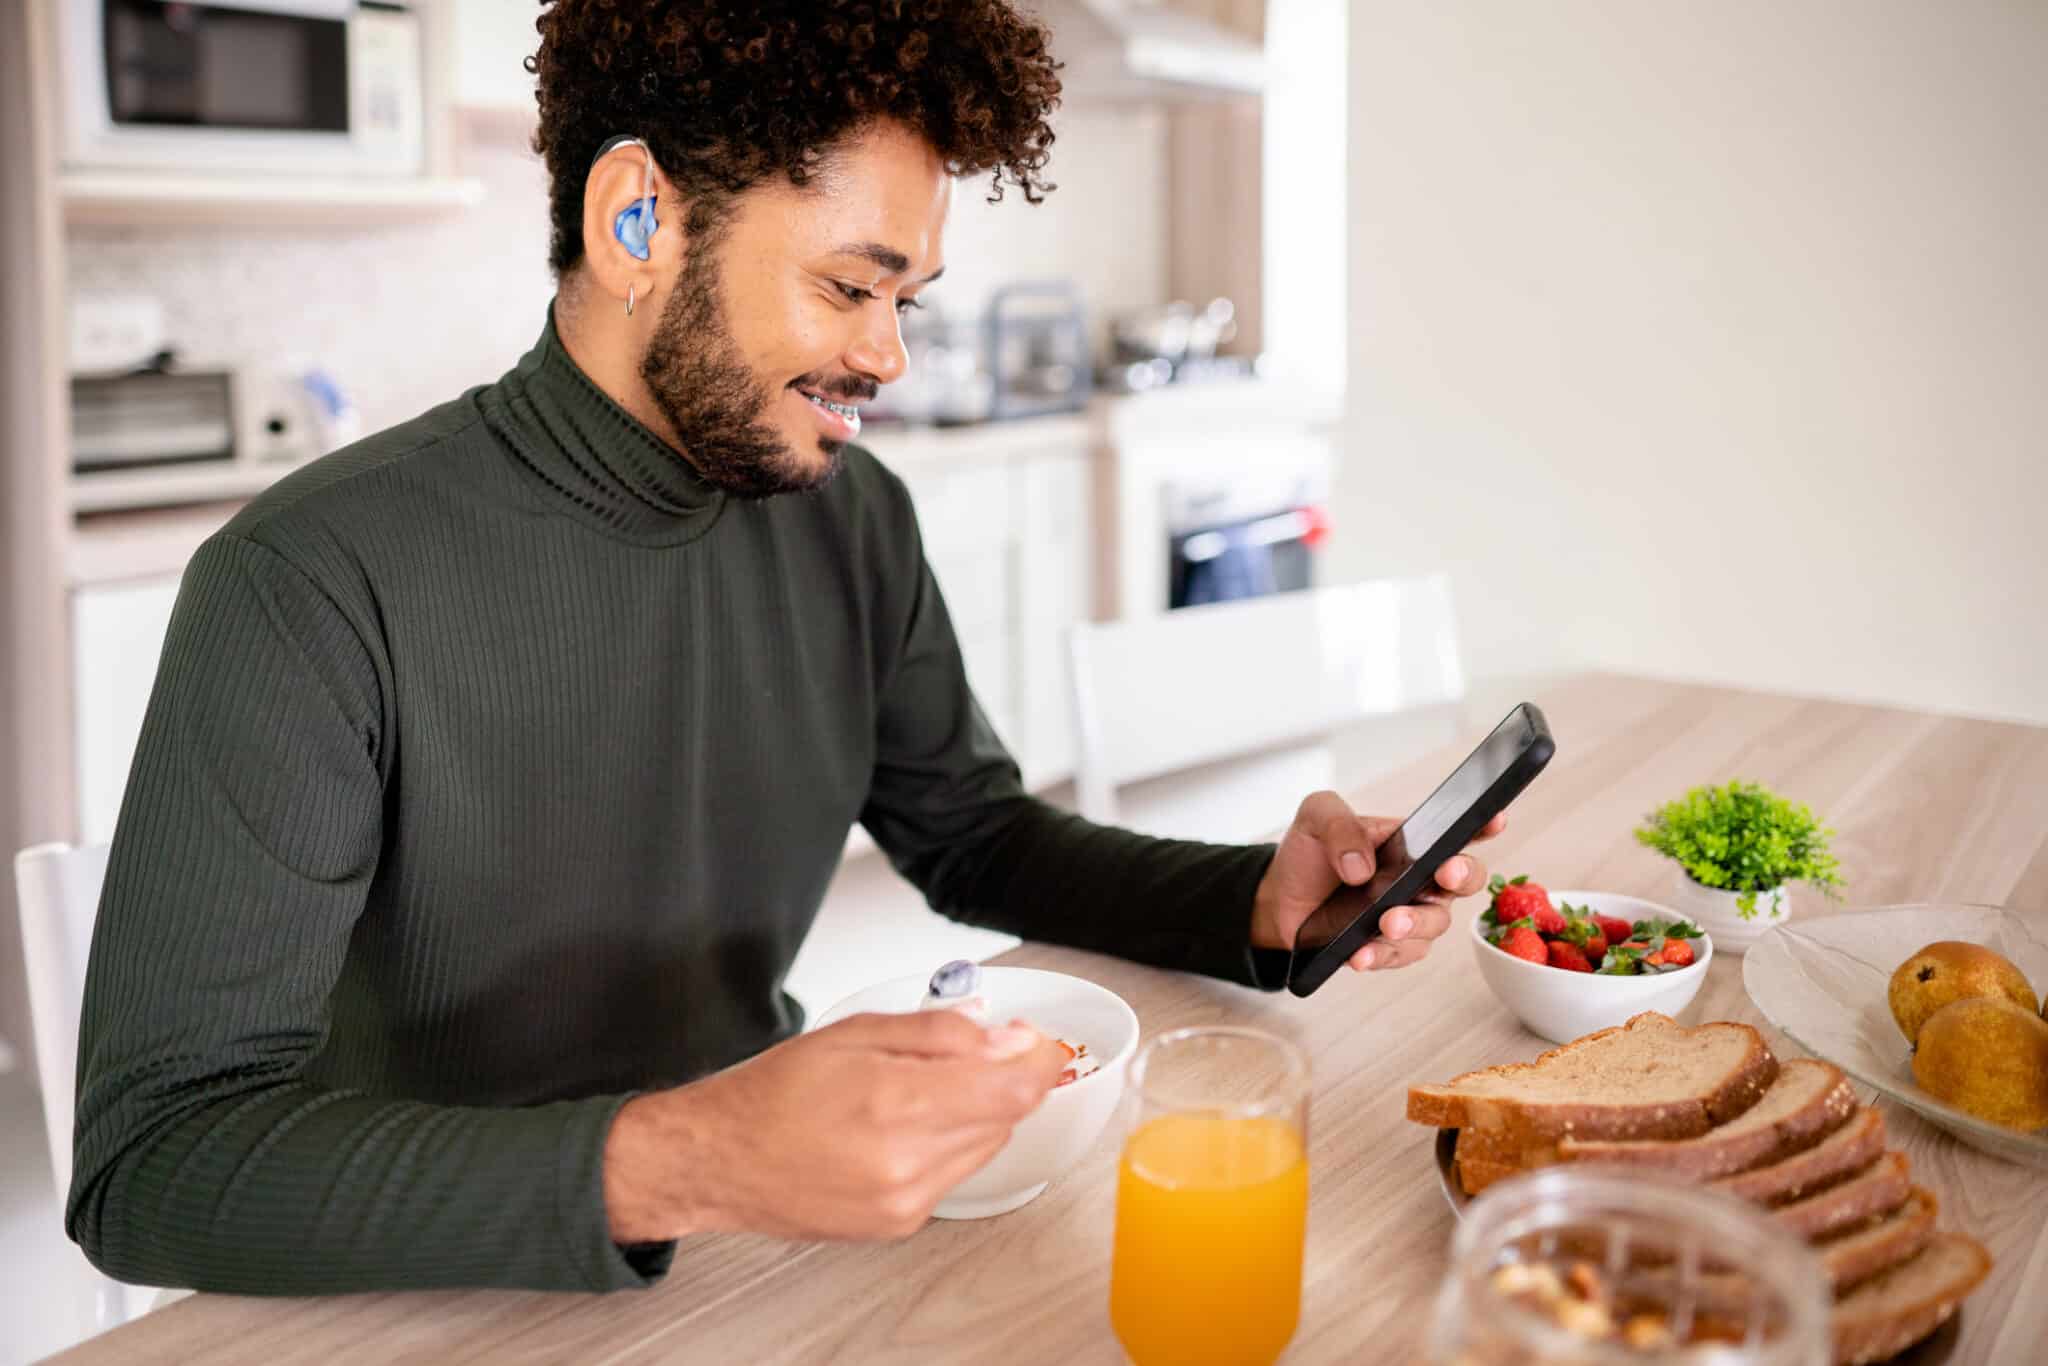 Young man with a hearing aid looks at his smartphone while having breakfast at home.